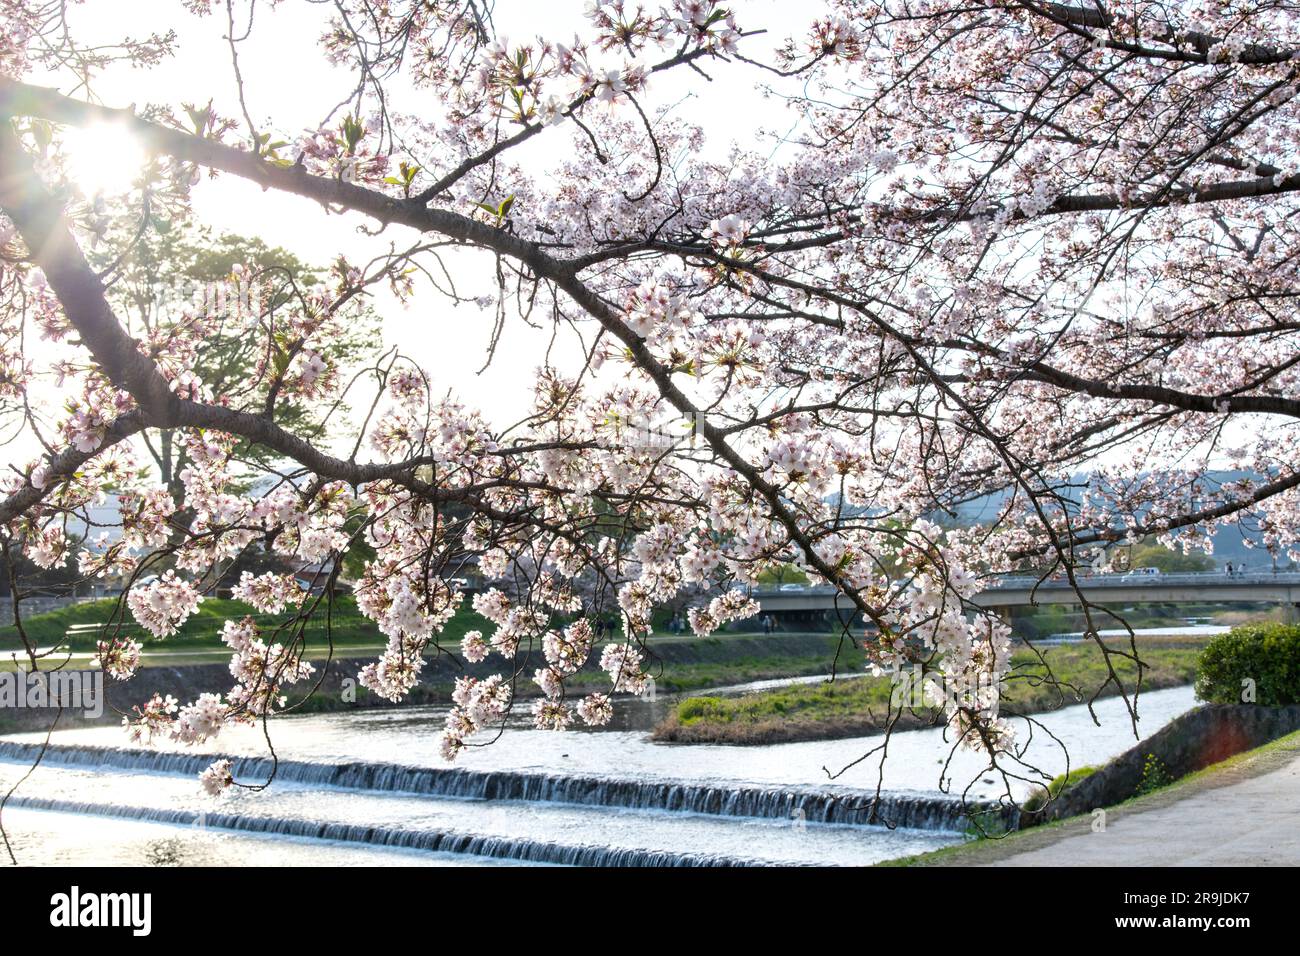 View through branches of Japanese Cherry tree with pink and white cherry blossom or Sakura against bright sun backdrop along the banks of the Kamo riv Stock Photo